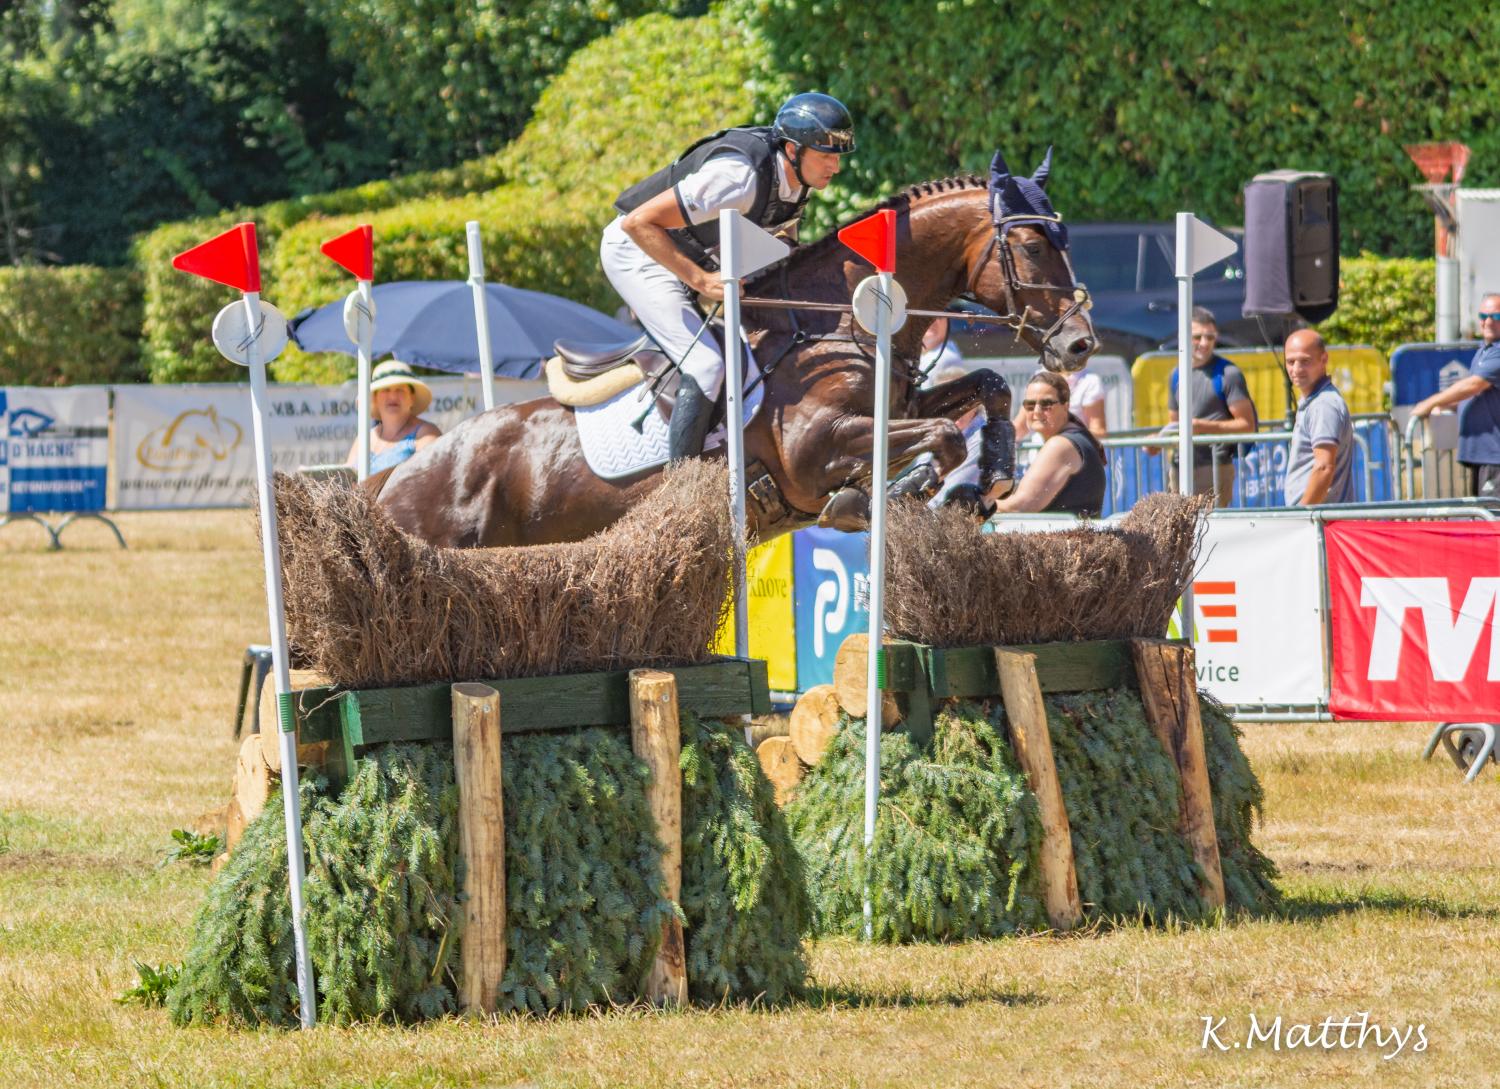 Kon Tiki Quality, an asset to breeders of eventing horses.